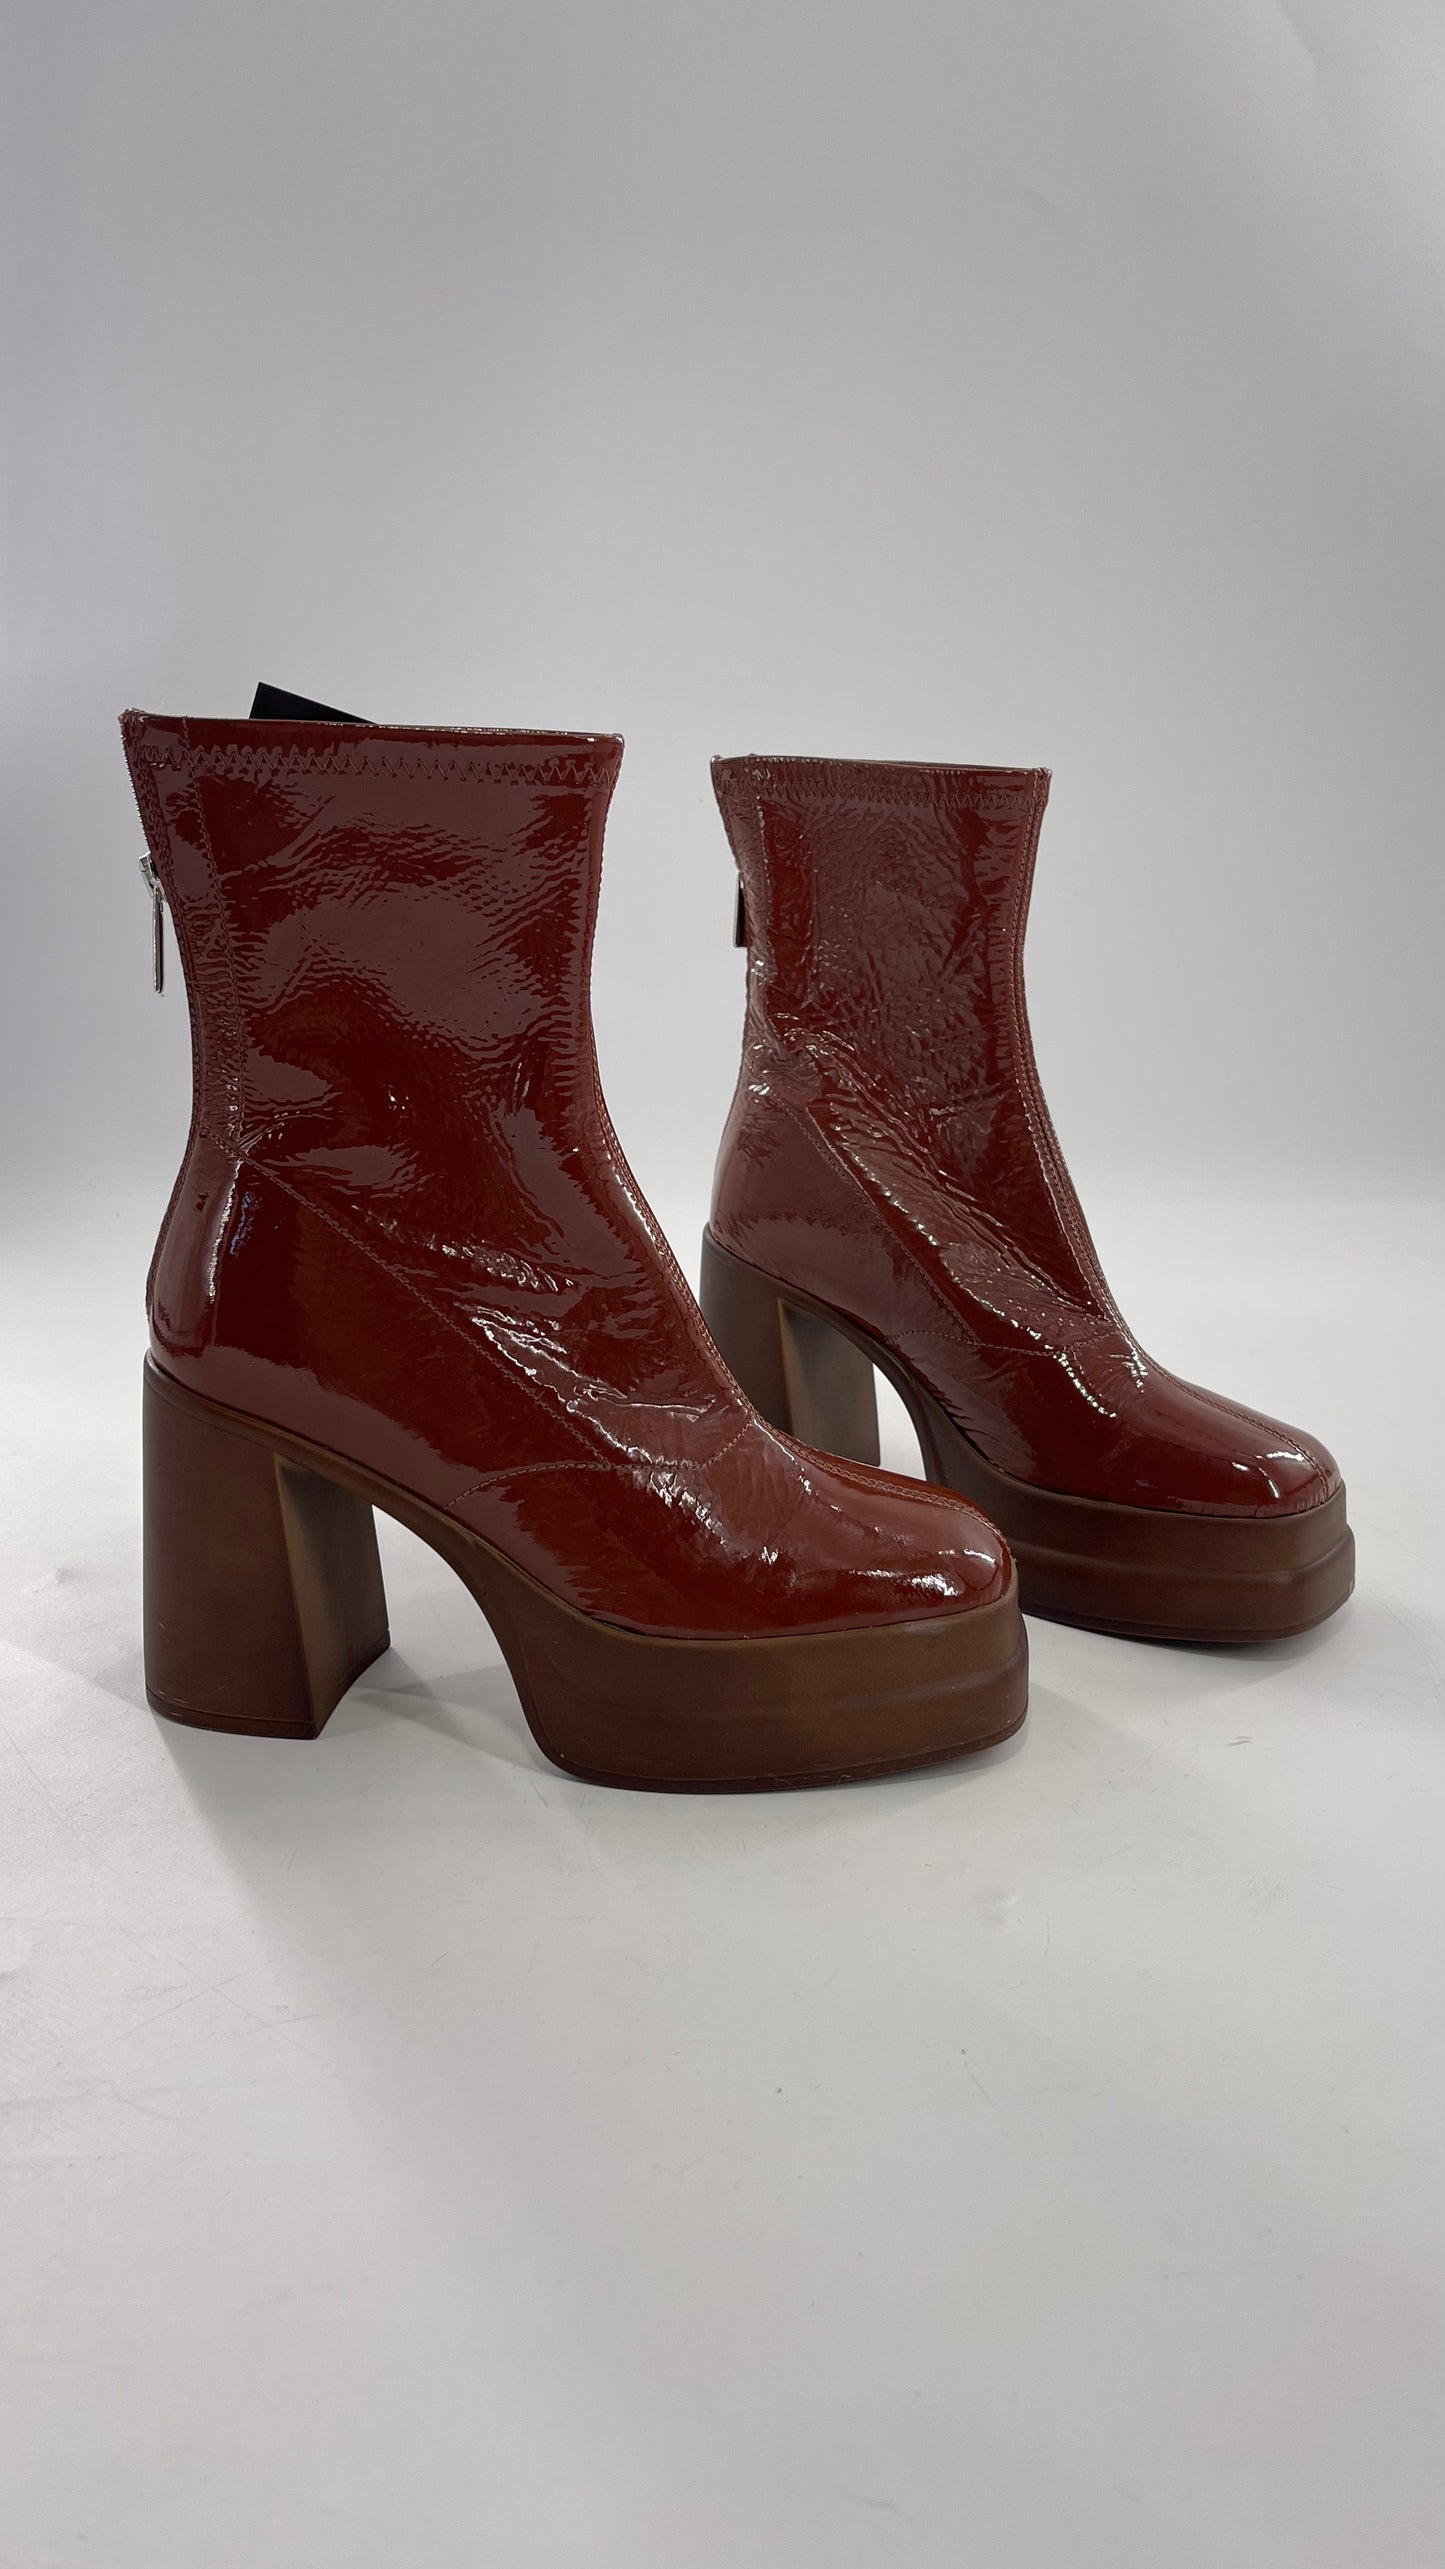 Free People Double StackedGlossy Patent Chestnut Brown Platform Boots with Chunky Heels (37.5)